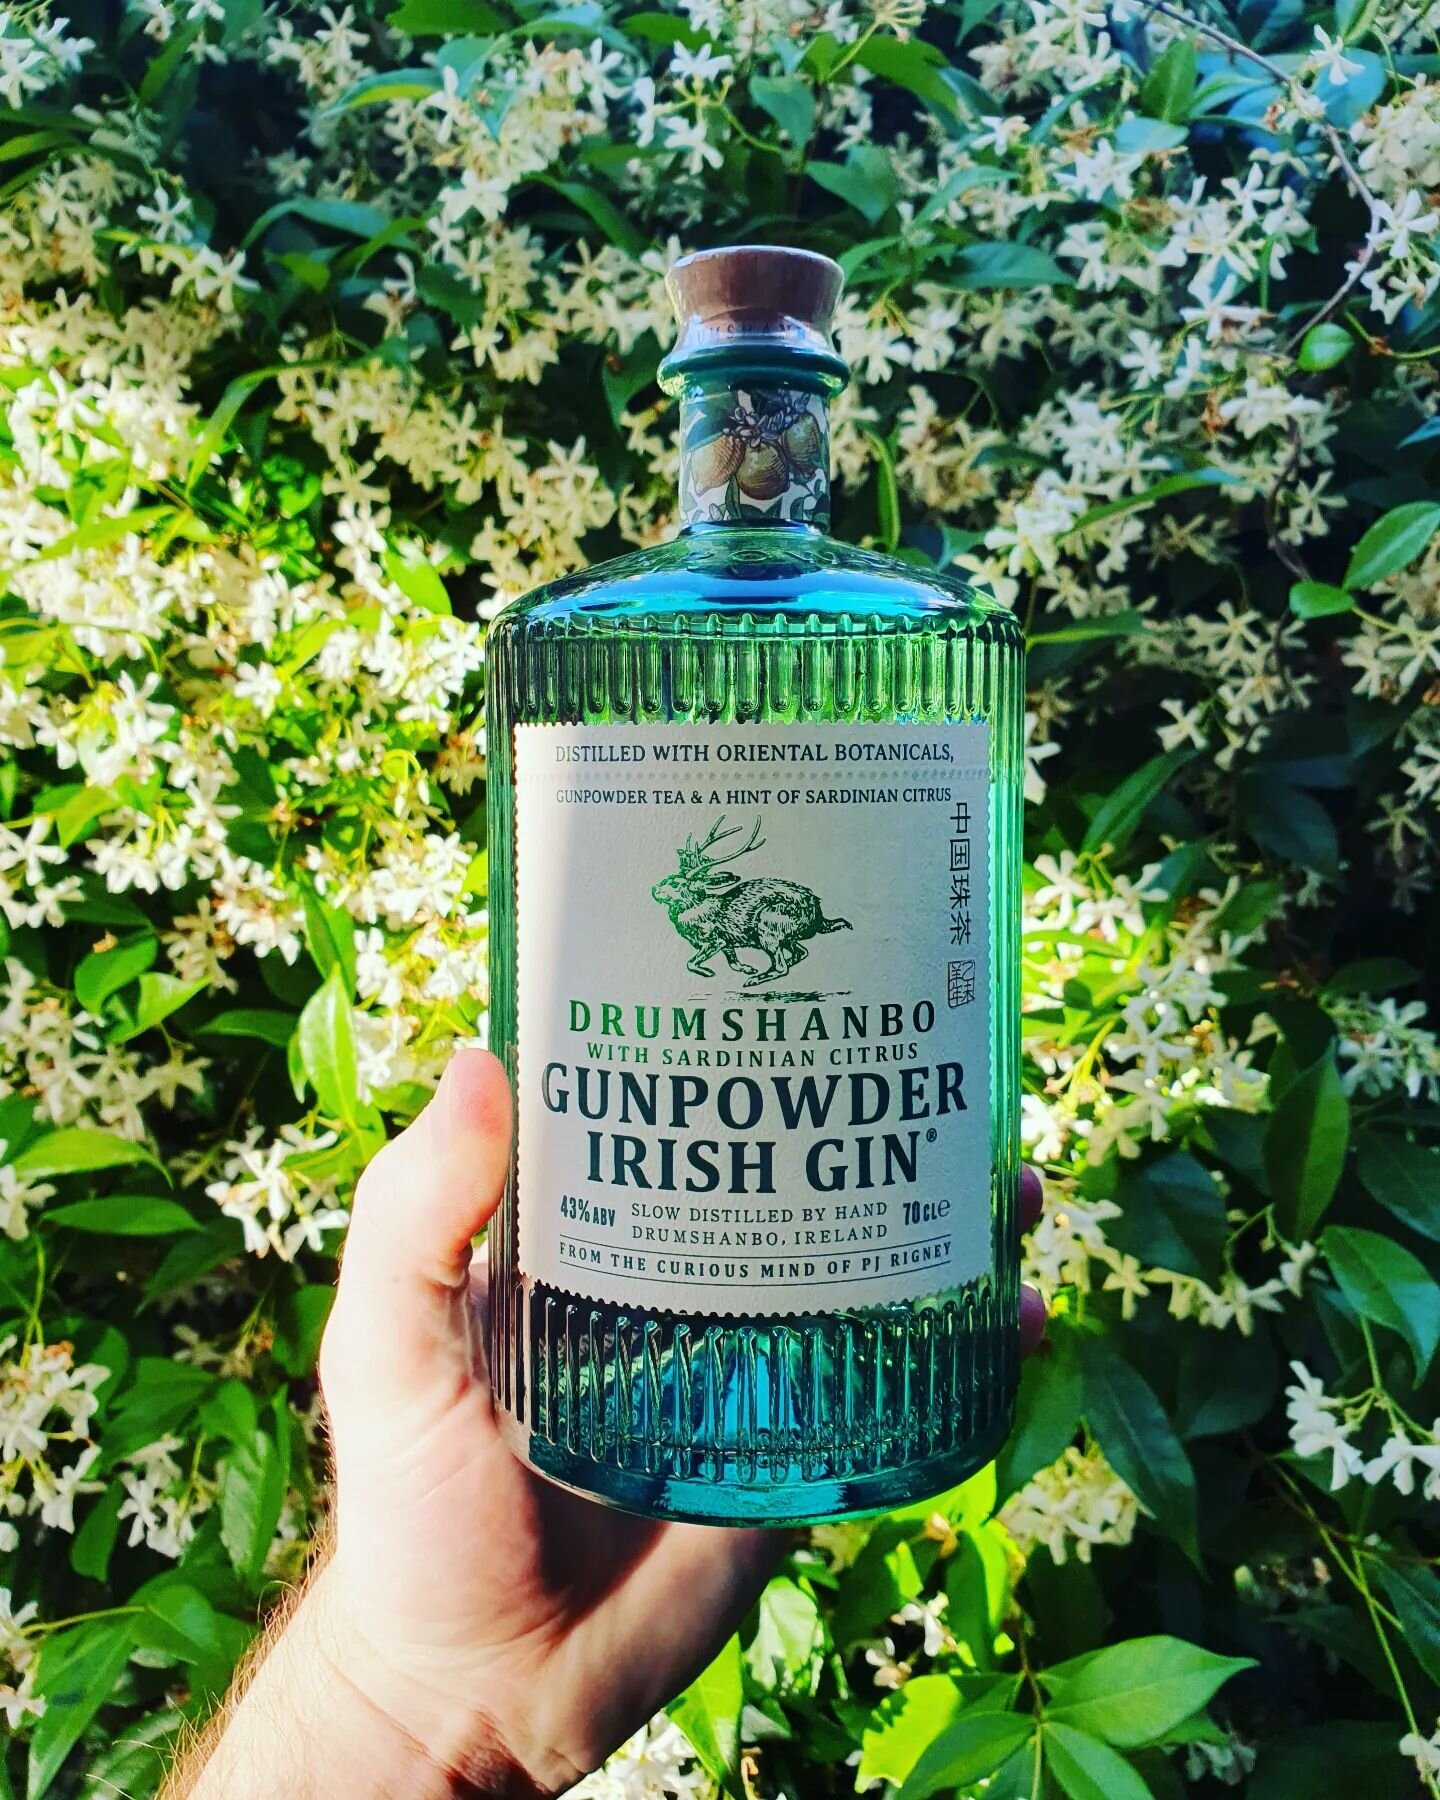 Oh welcome back gin weather. Plenty of new ones hitting the shelves including this fantastic Sardinian Citrus Irish Gin from Drumshambo. Not only does the bottle sparkle on any display but the gin itself is divine. Pleasant blend or citrus flavours a